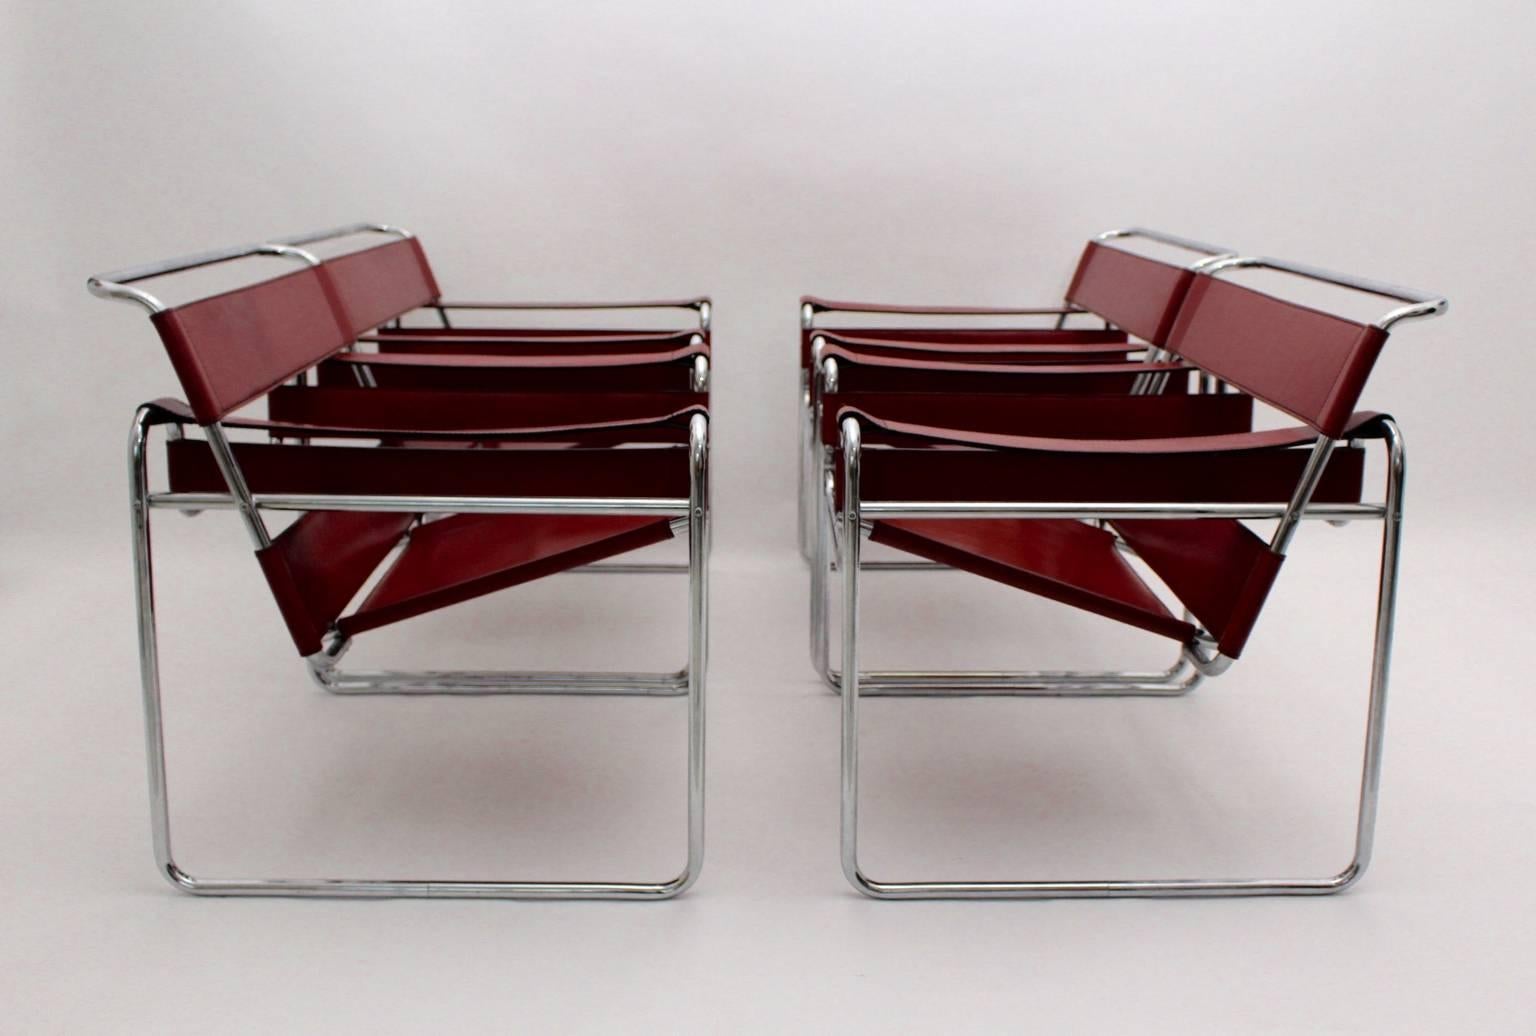 A Bauhaus Vintage set of four leather Wassily lounge chairs or amrchairs Mod B 3, which were designed by Marcel Breuer 1925-1927 and executed by Fasem ( leather stamped ) Italy, 1986.
The tabular steel frame shows red color leather seat and back